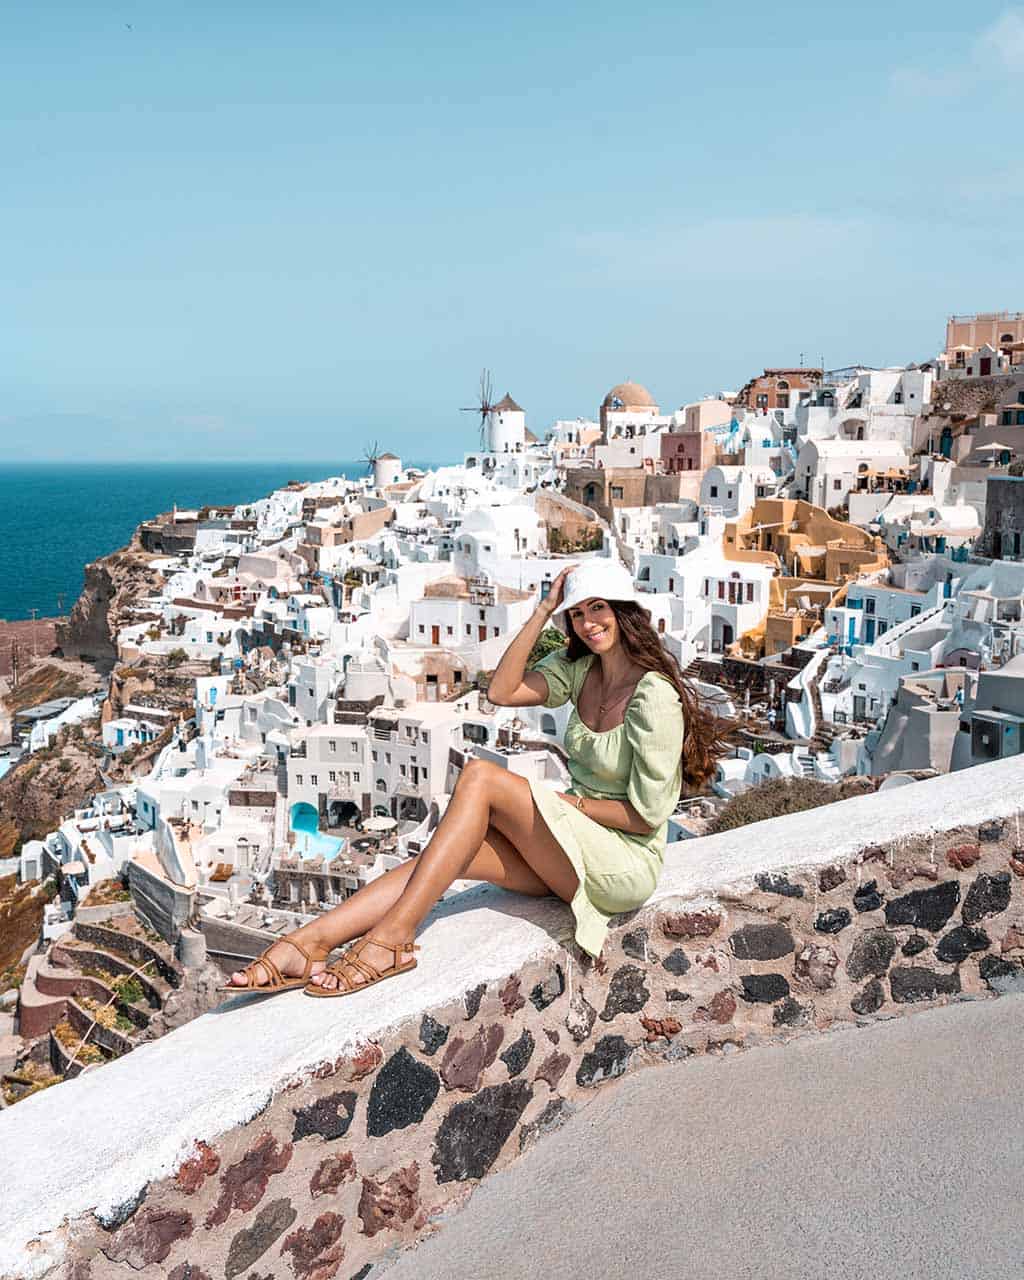 A photo of me sitting at the viewpoint of Oia Castle, surrounded by white-washed buildings, a charming windmill, and the sea in the background.